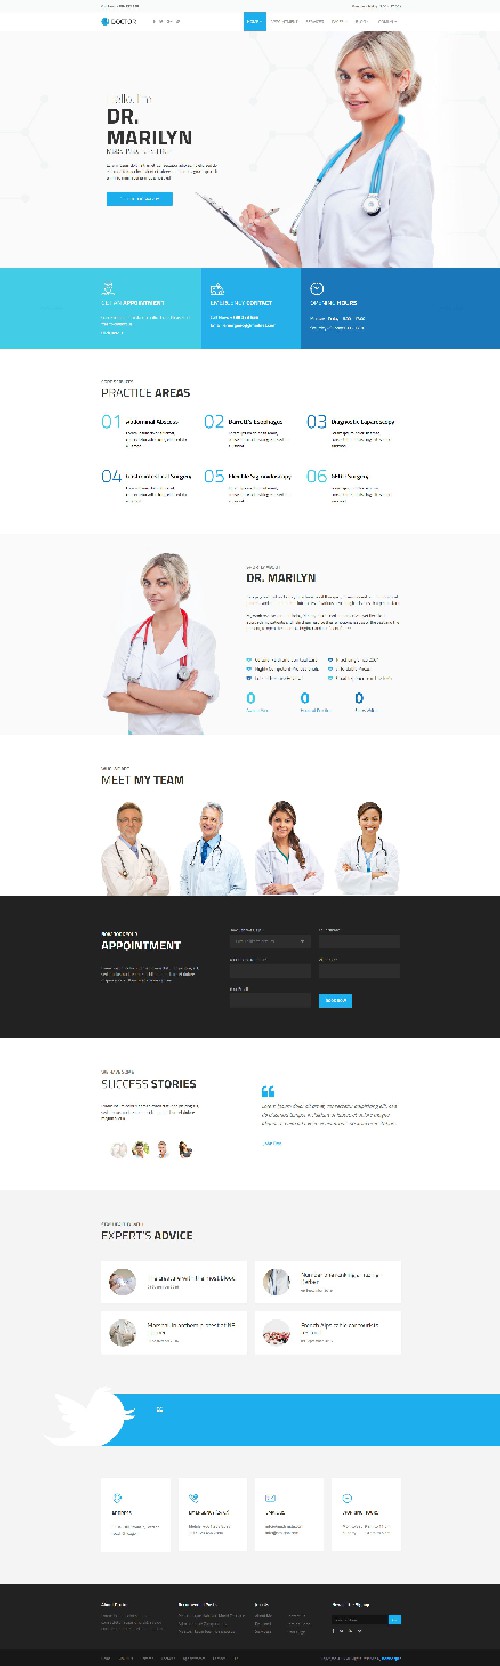 Doctor - Joomla 4 Template for Medical Clinic Sites